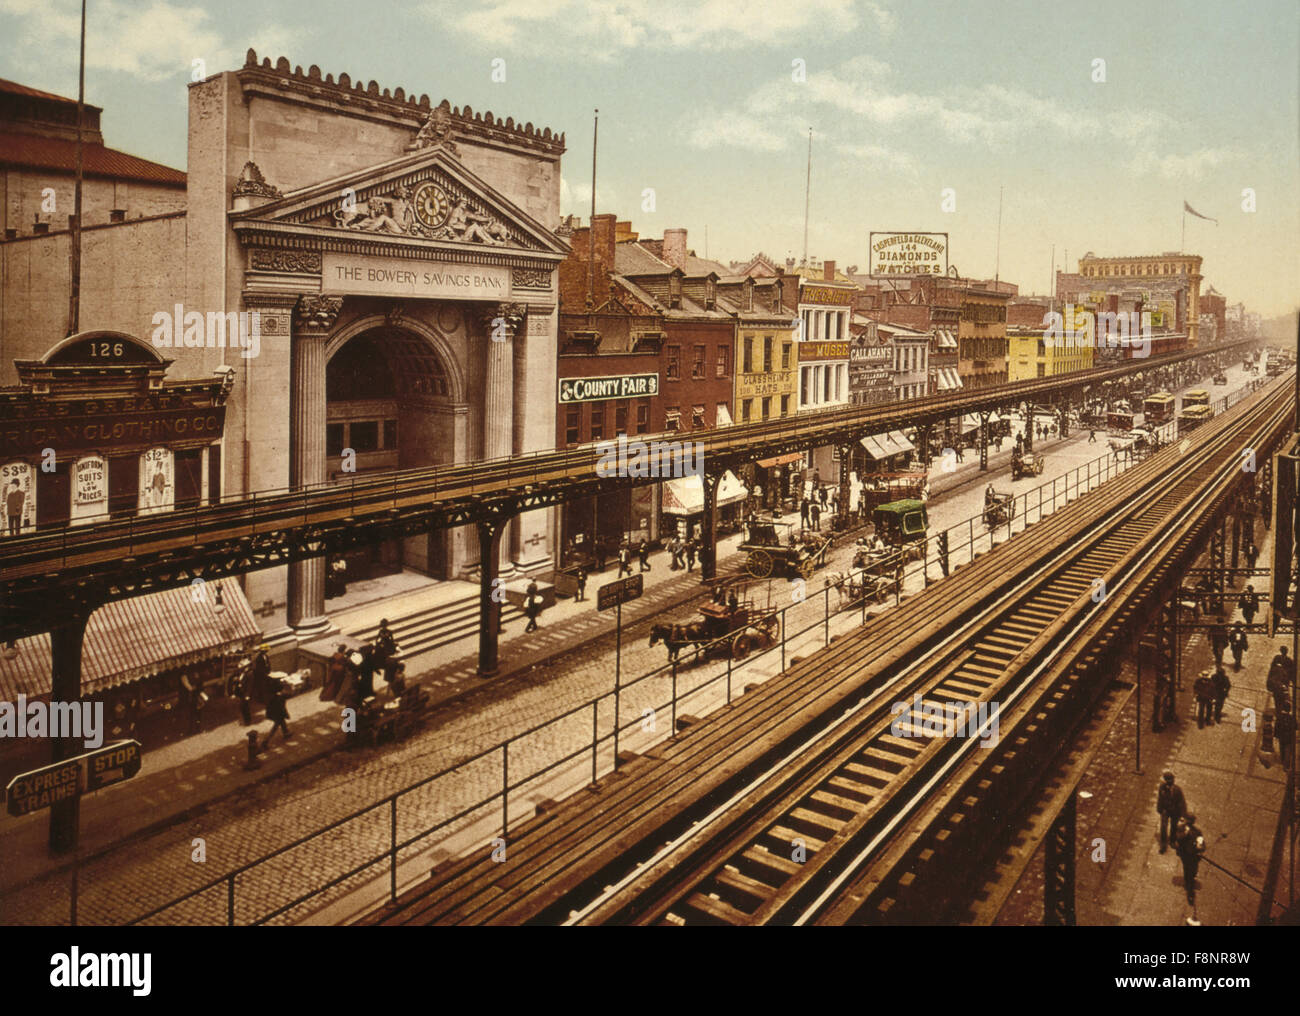 Buildings and Elevated Train Tracks Along the Bowery, New York City, USA, circa 1900 Stock Photo